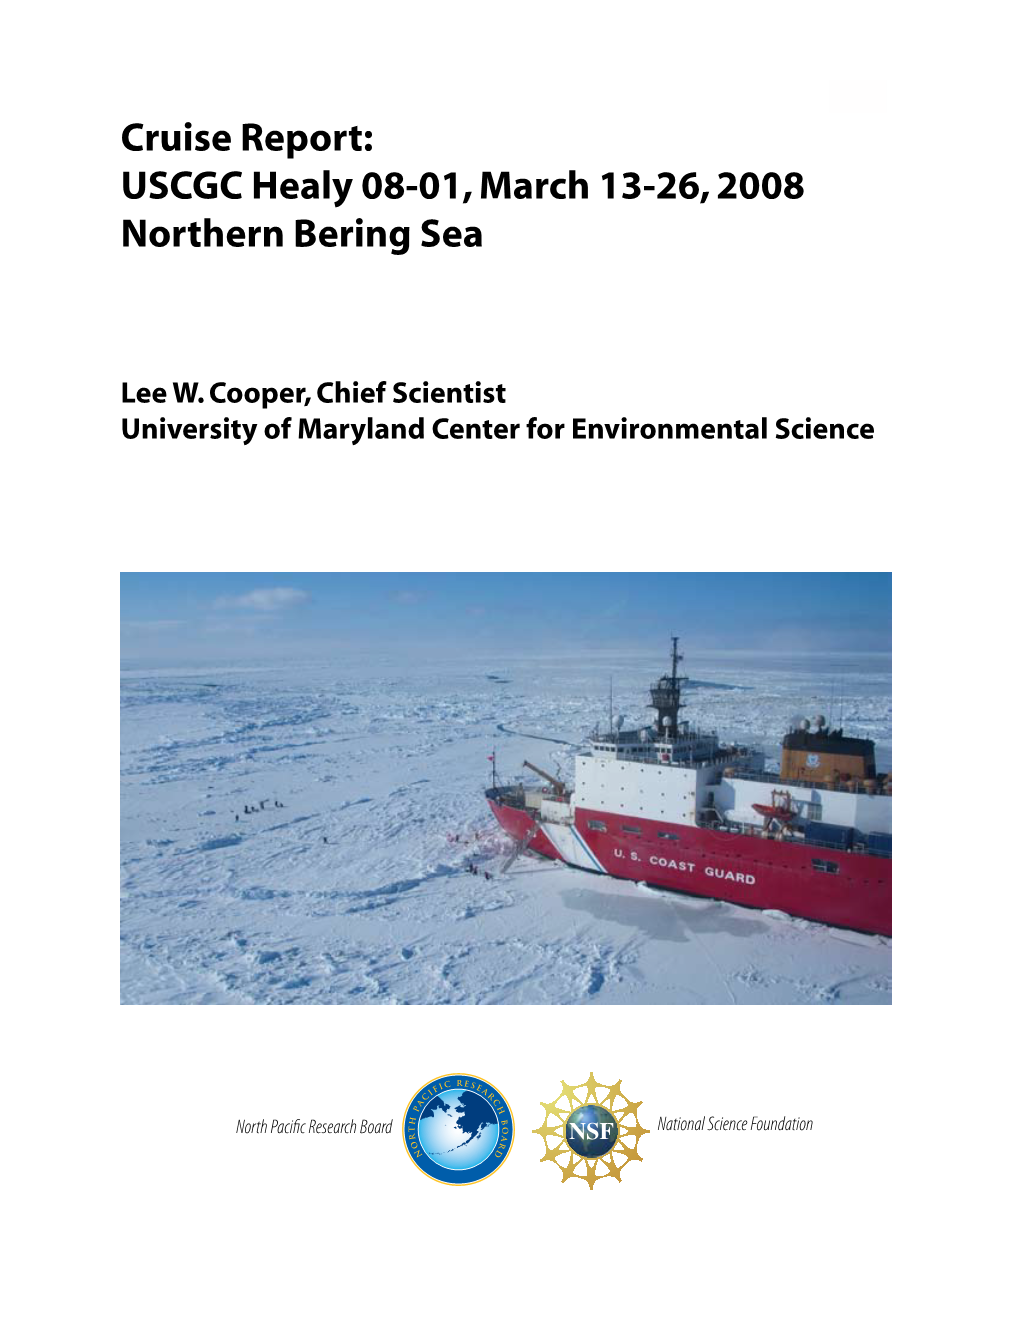 Cruise Report: USCGC Healy 08-01, March 13-26, 2008 Northern Bering Sea